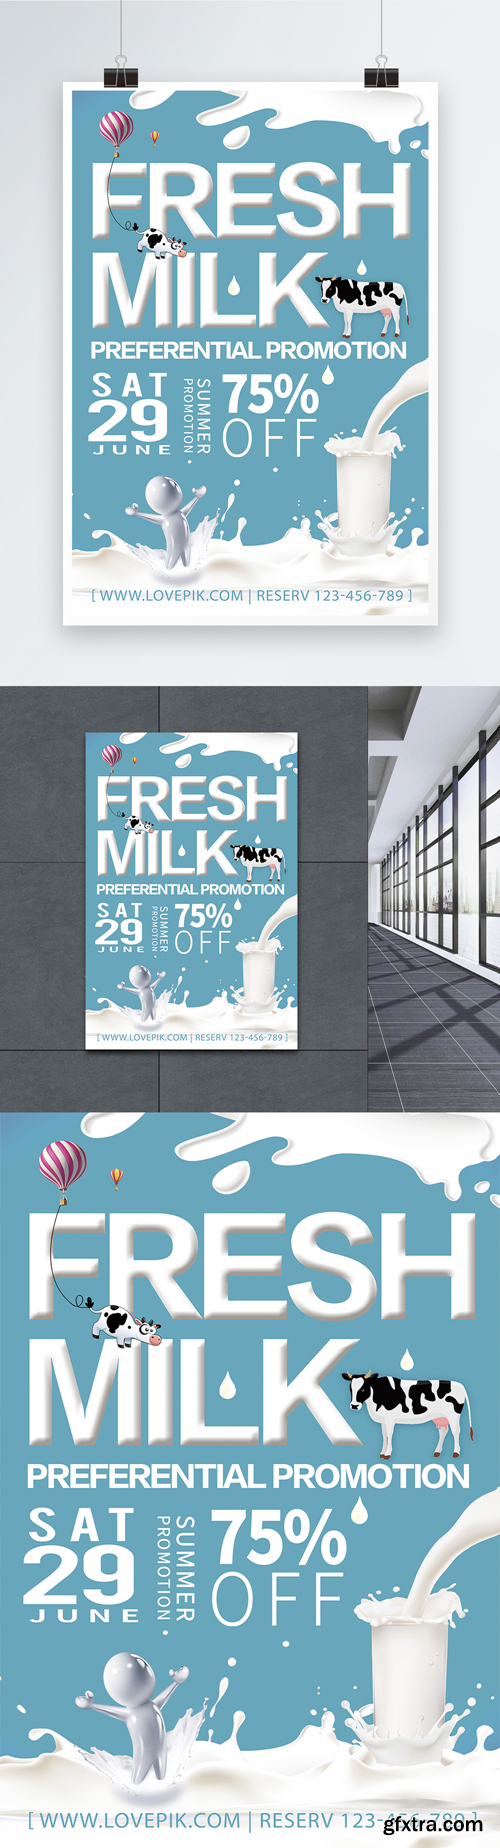 milk promotion posters